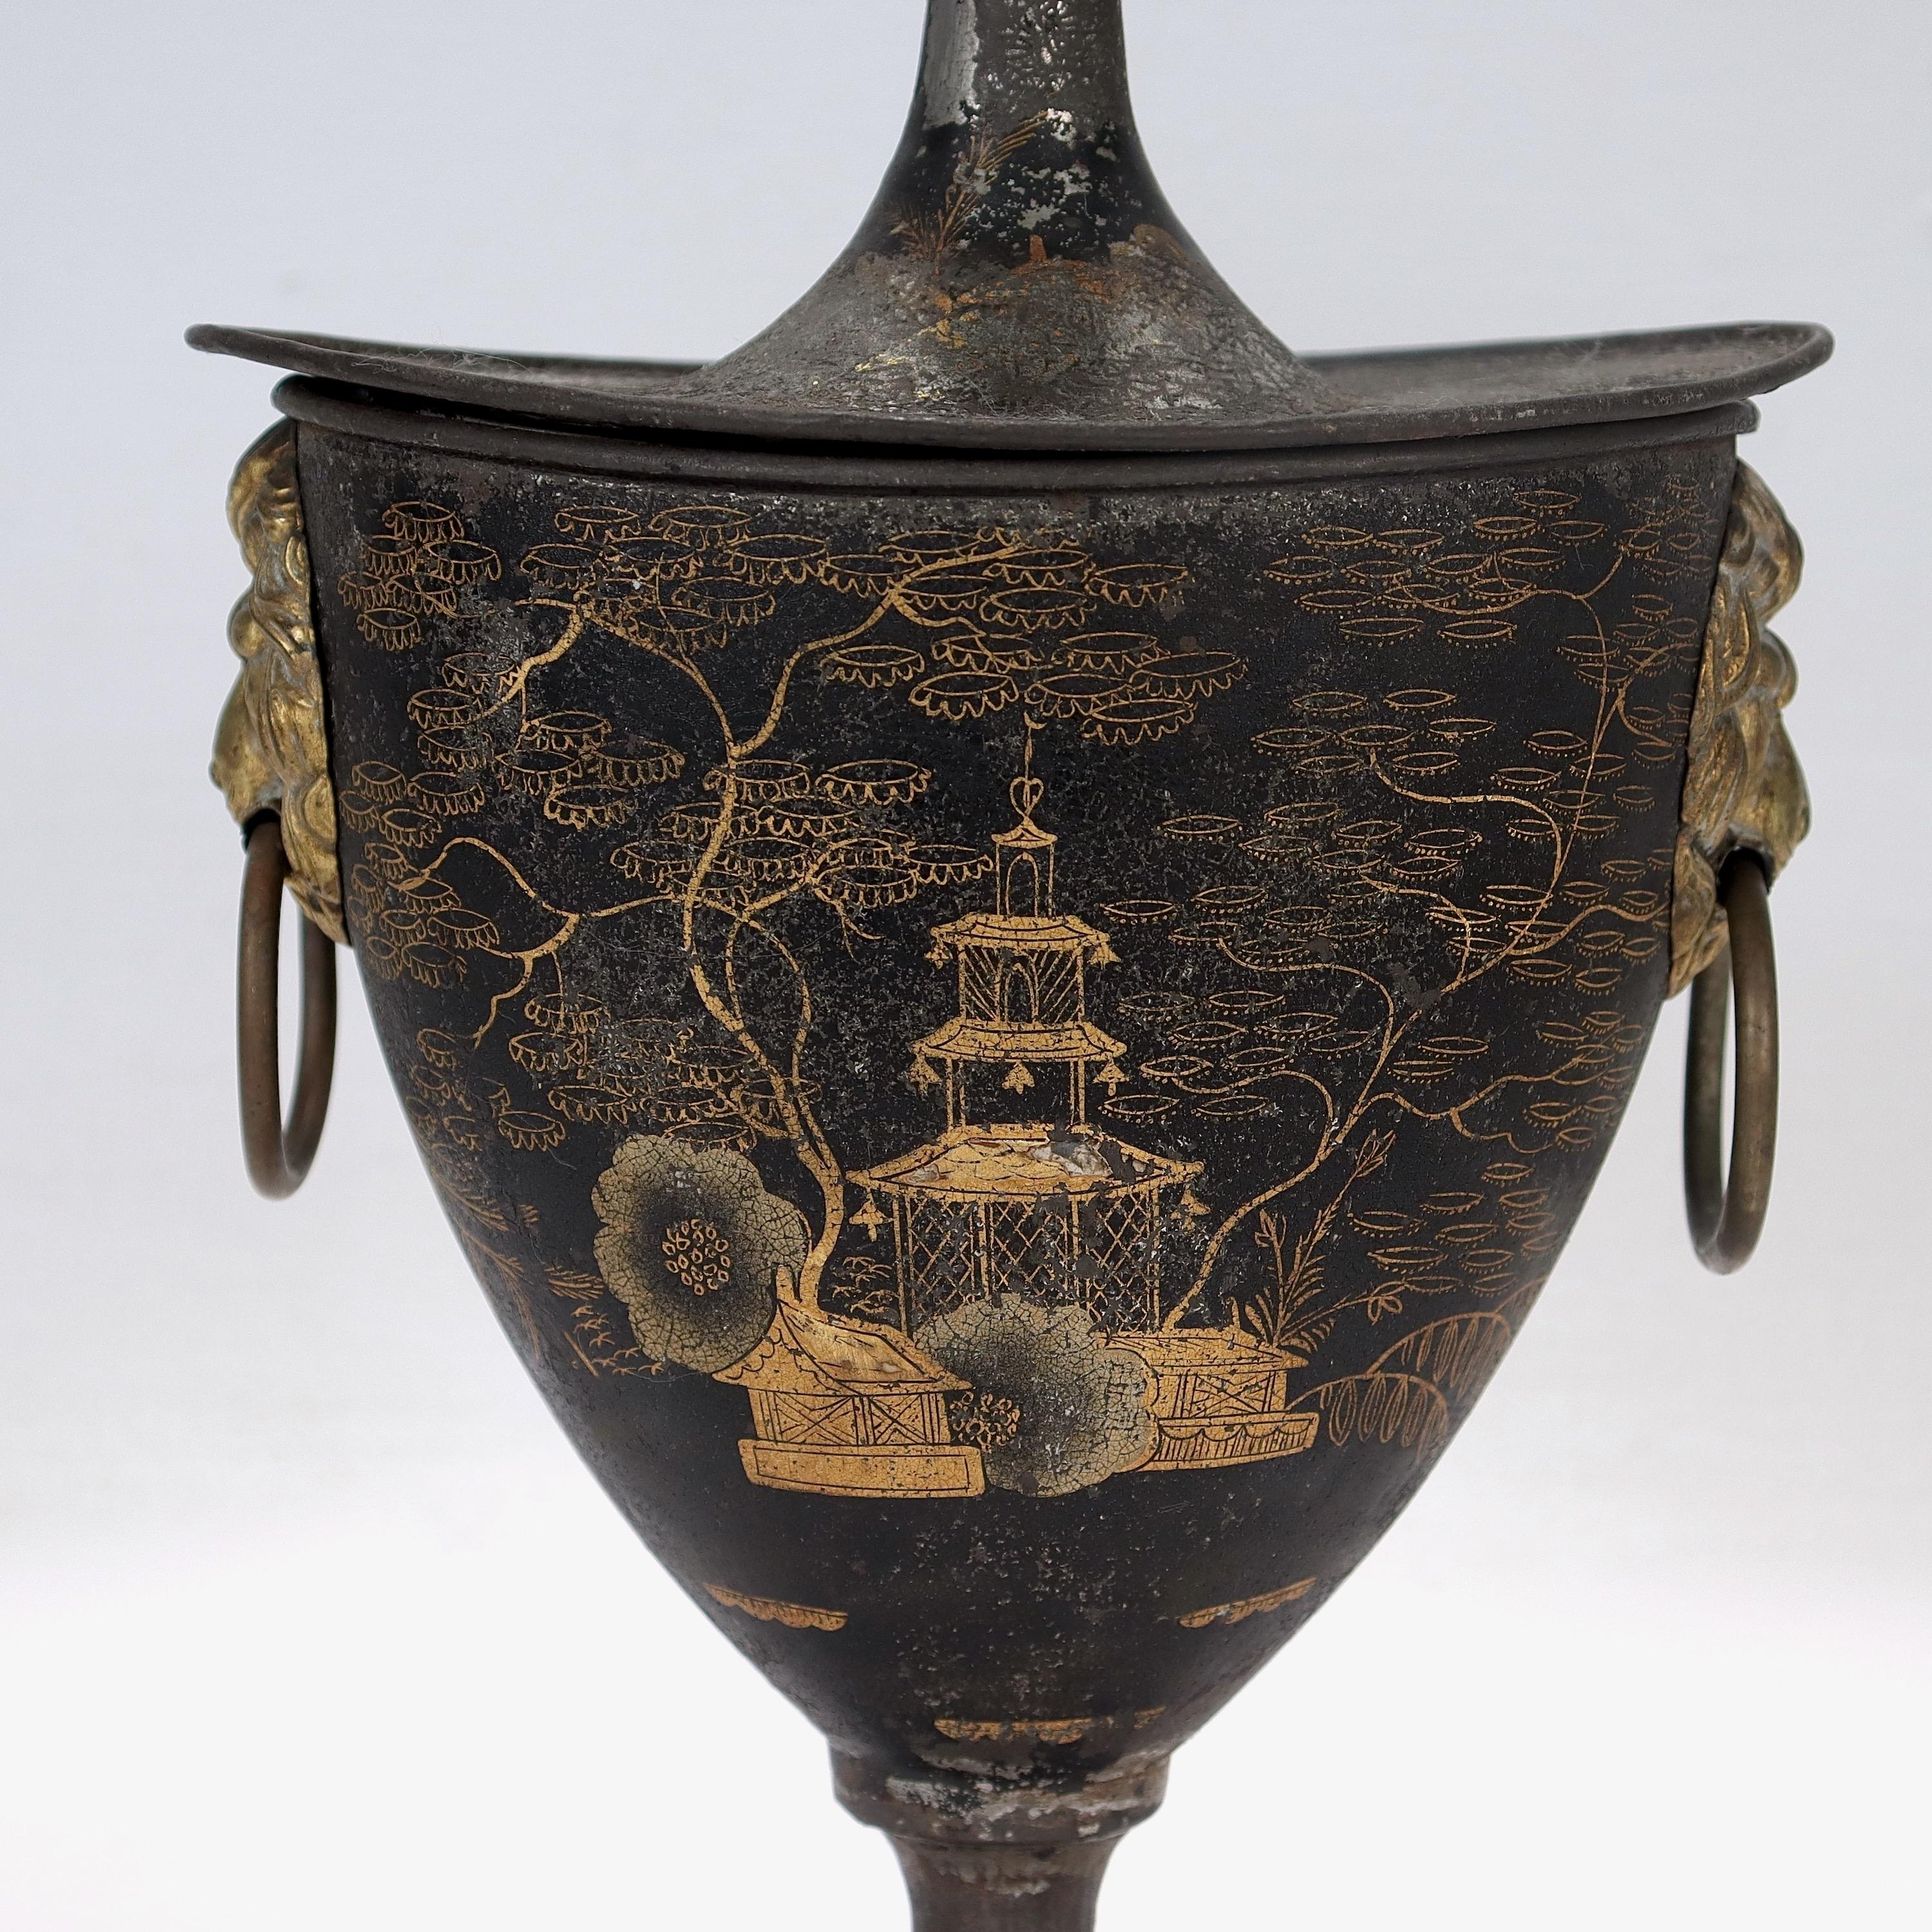 Antique English Regency Chinoiserie Toleware Covered Chestnut Urn or Vase 5